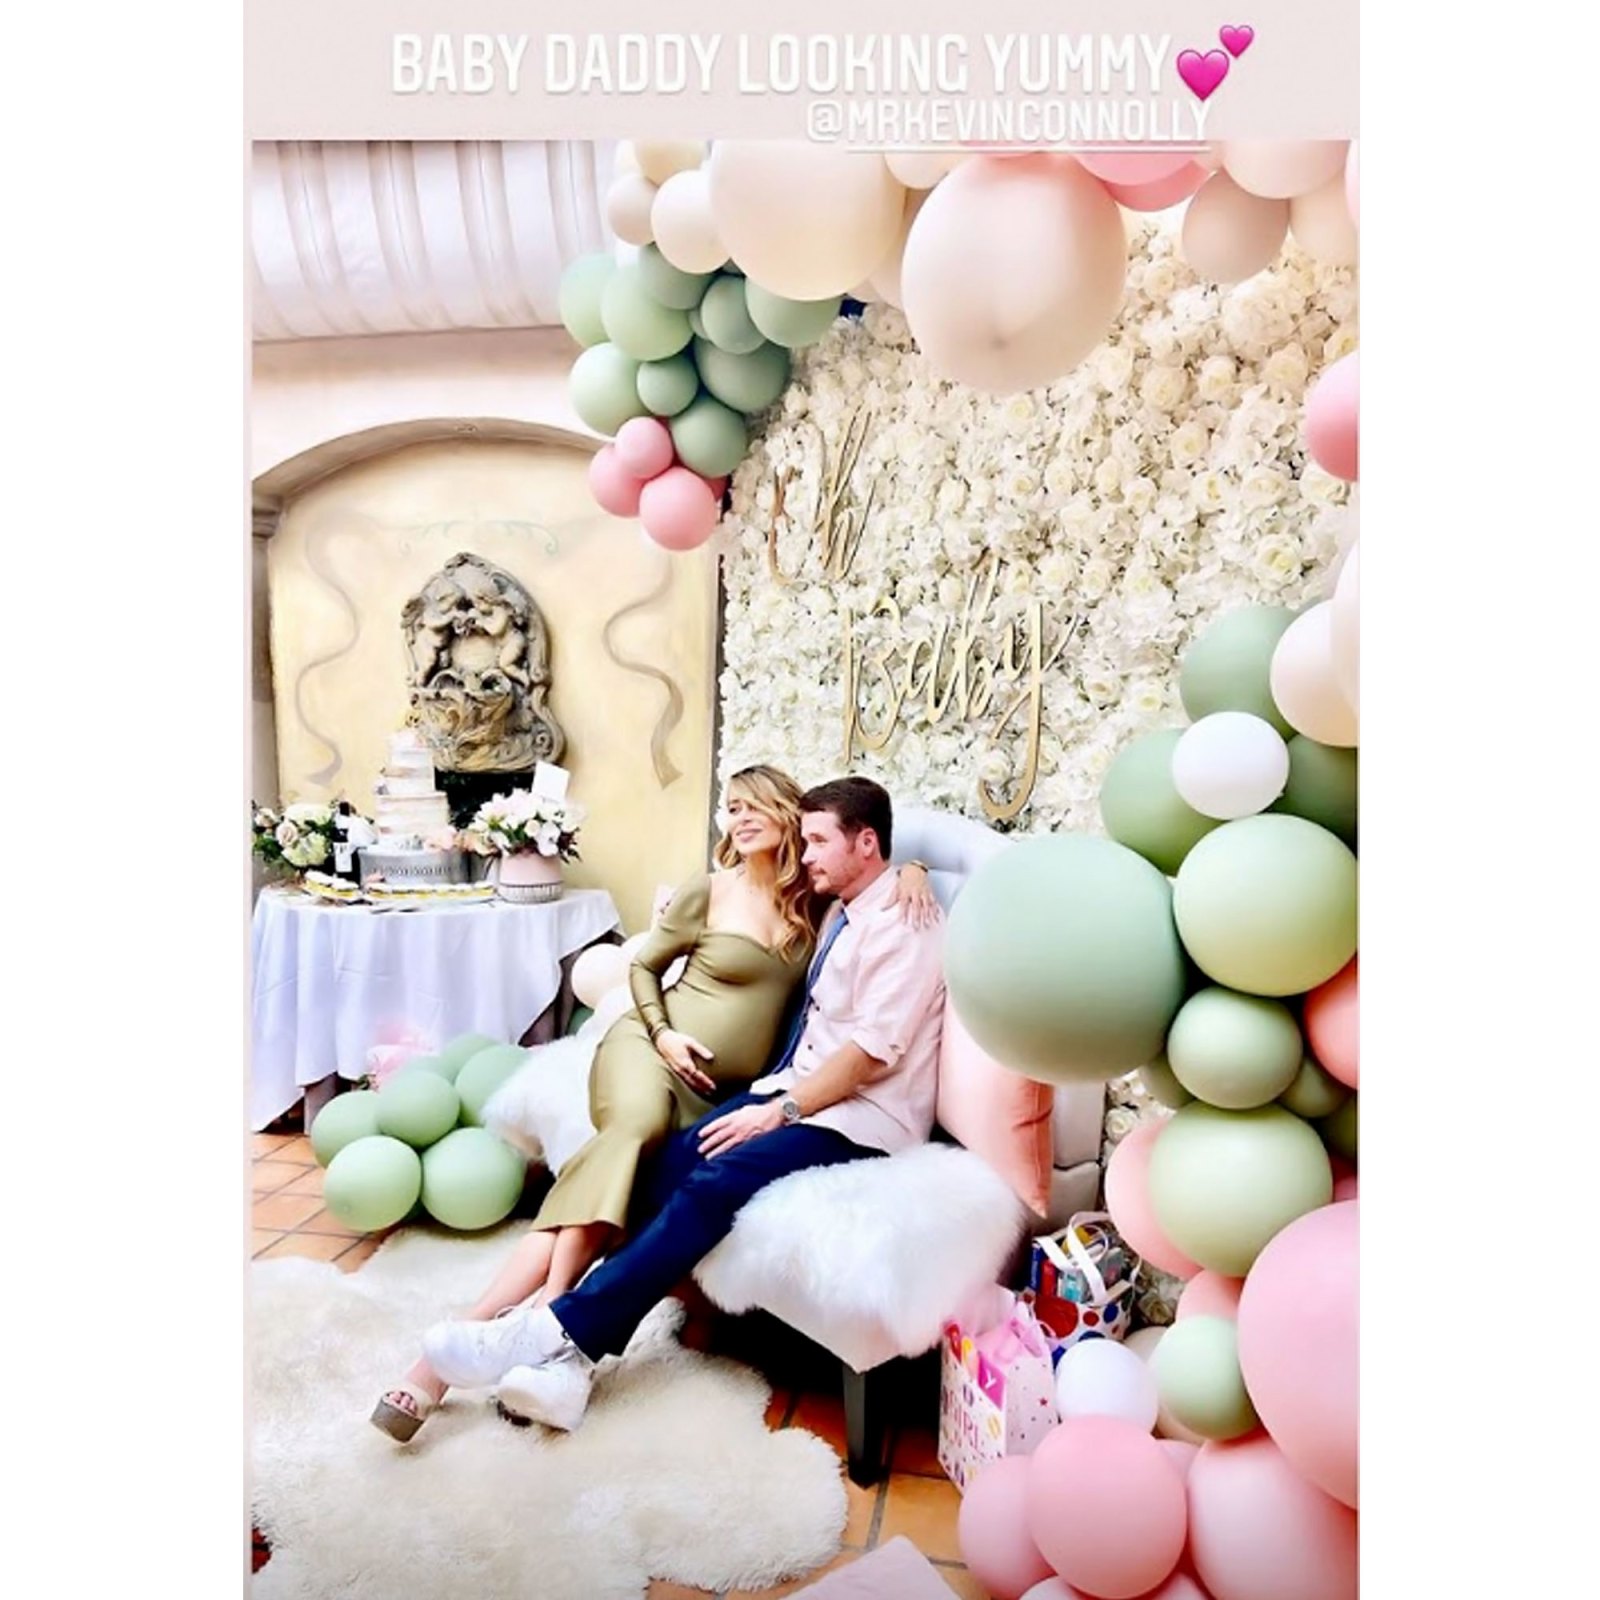 Kevin Connolly GF Zunay Henao Pregnant Stars Celebrate Baby Showers